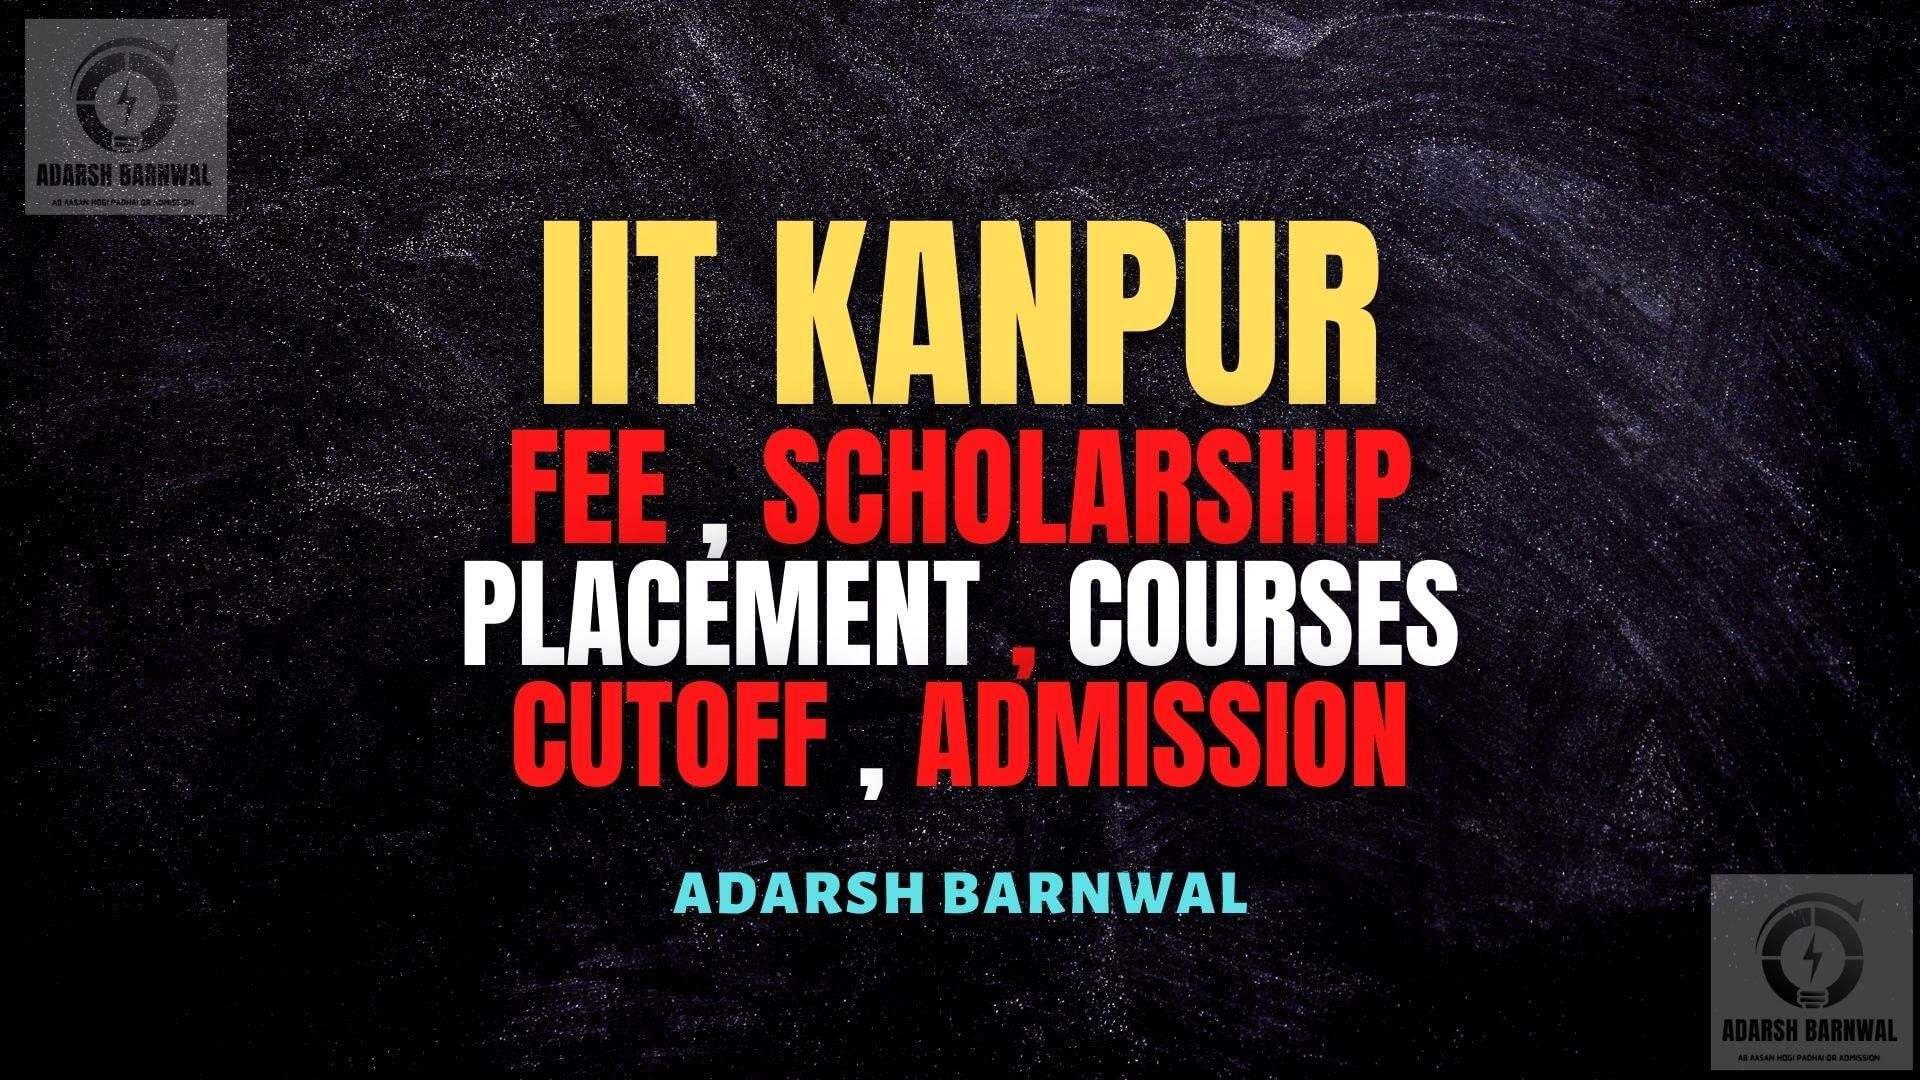 IME IIT Kanpur Placements 2022: Highest Package: INR 20 LPA & 43 Offers  Were Made